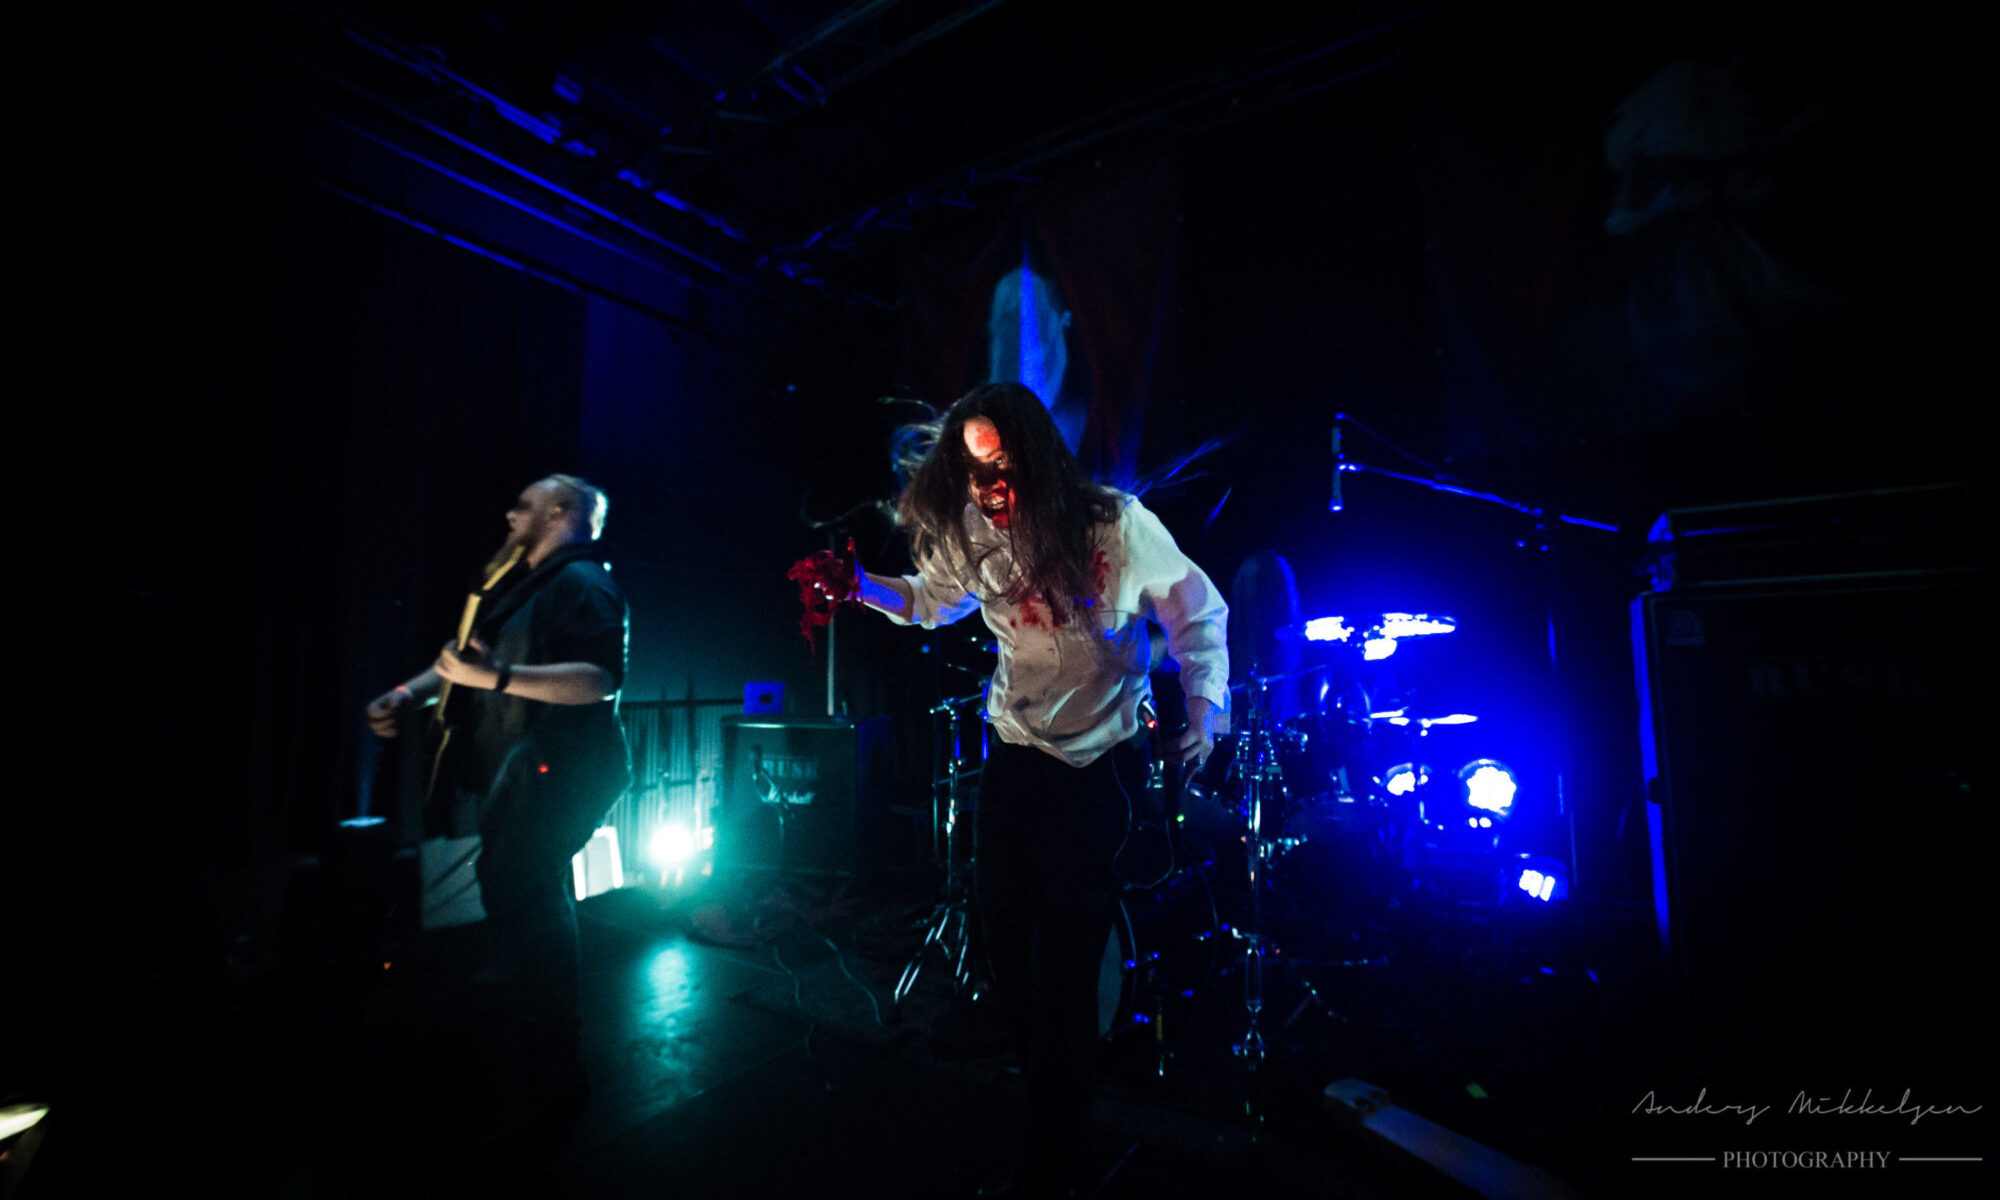 Ethereal Kingdoms live review metaladay.dk. Sofia Schmidt with bloody heart special effect at Copenhagen Metal Fest 2019